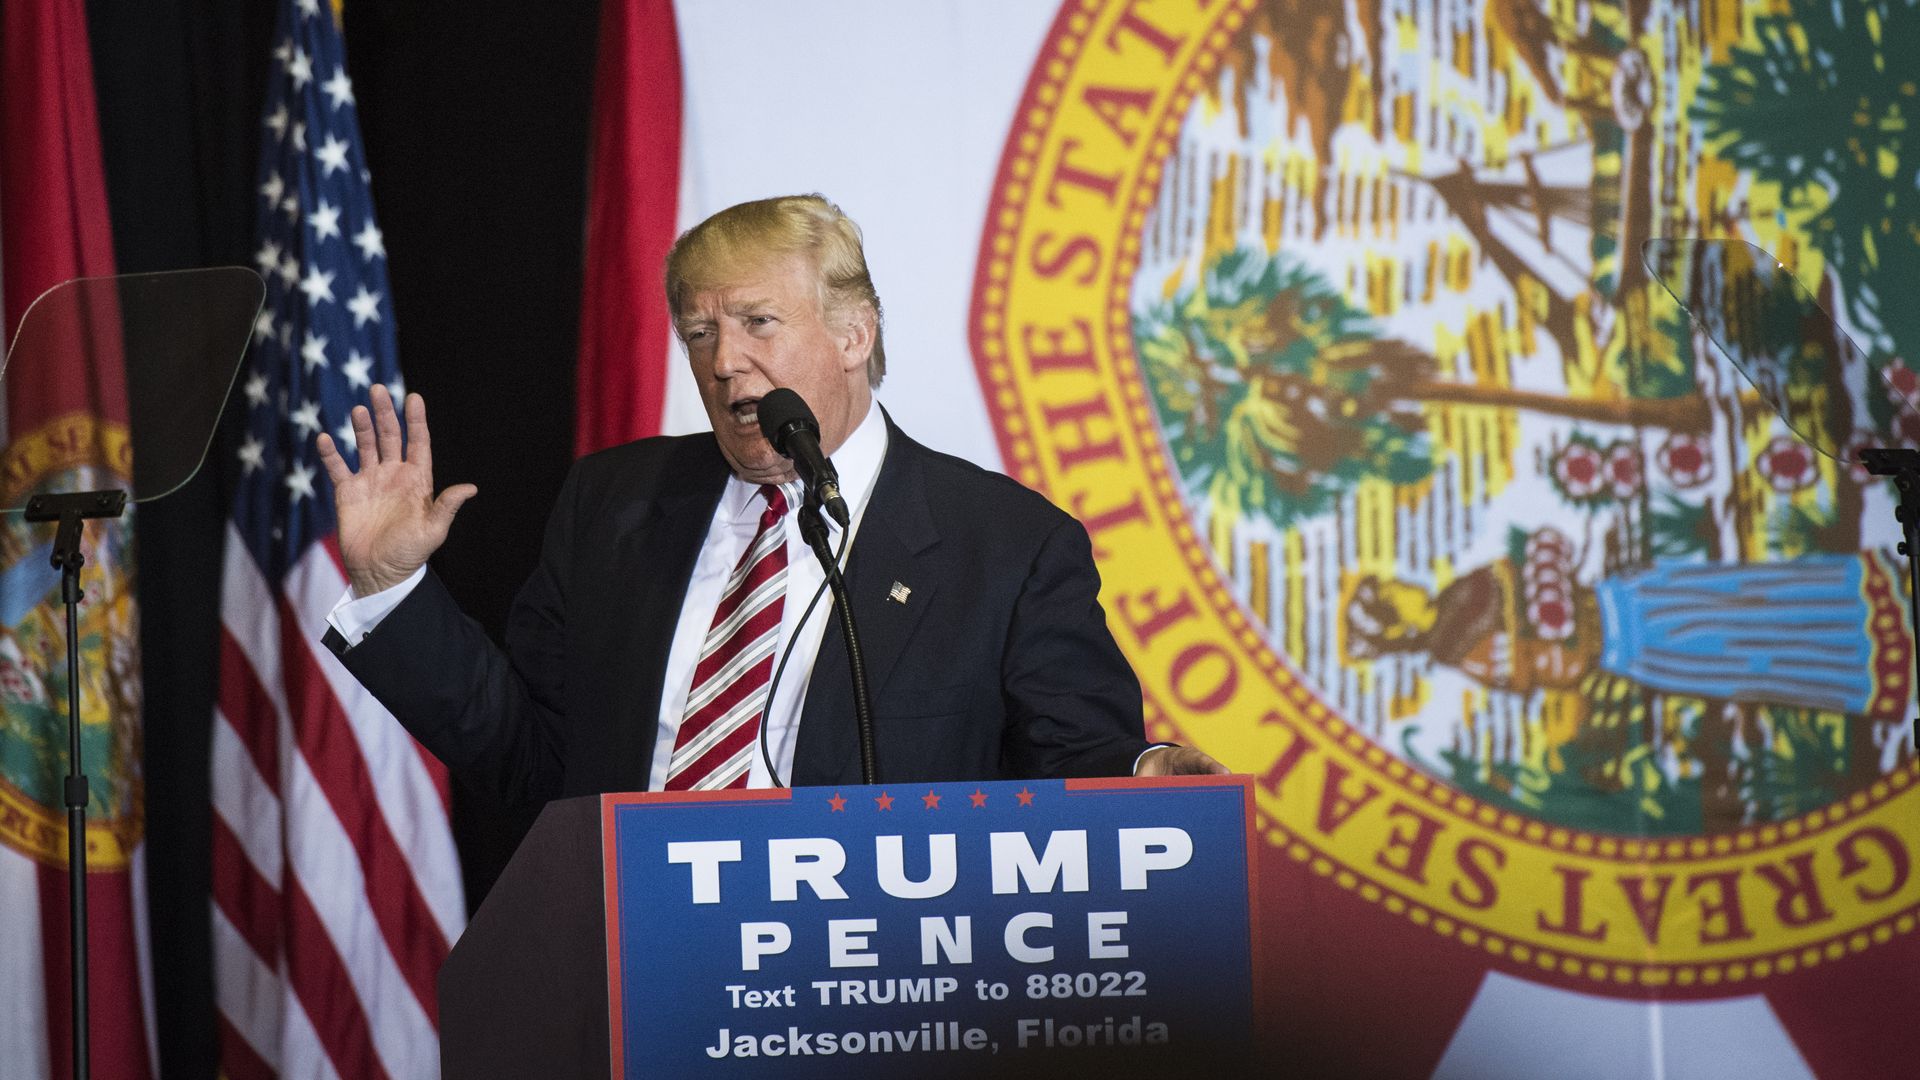 Trump at a Jacksonville rally in 2016. Photo: Jabin Botsford/The Washington Post via Getty Images